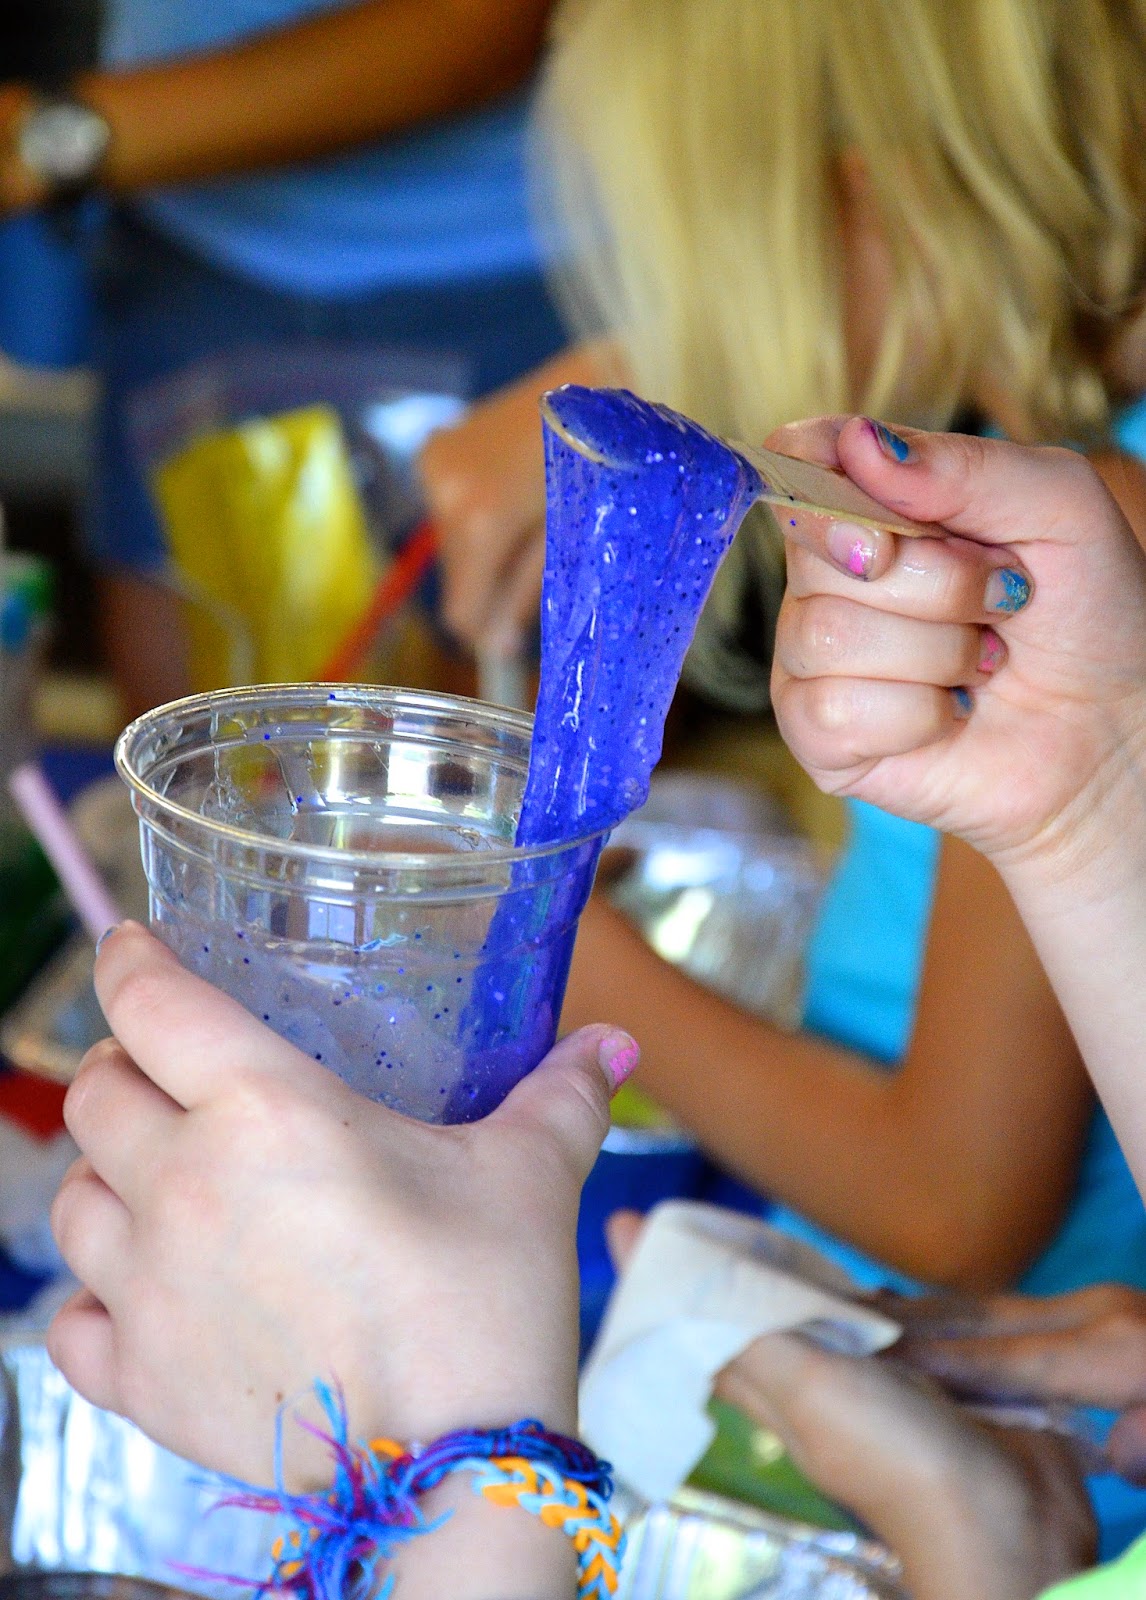 SLIME FOR KIDS!! How To Make Slime Bubbles 